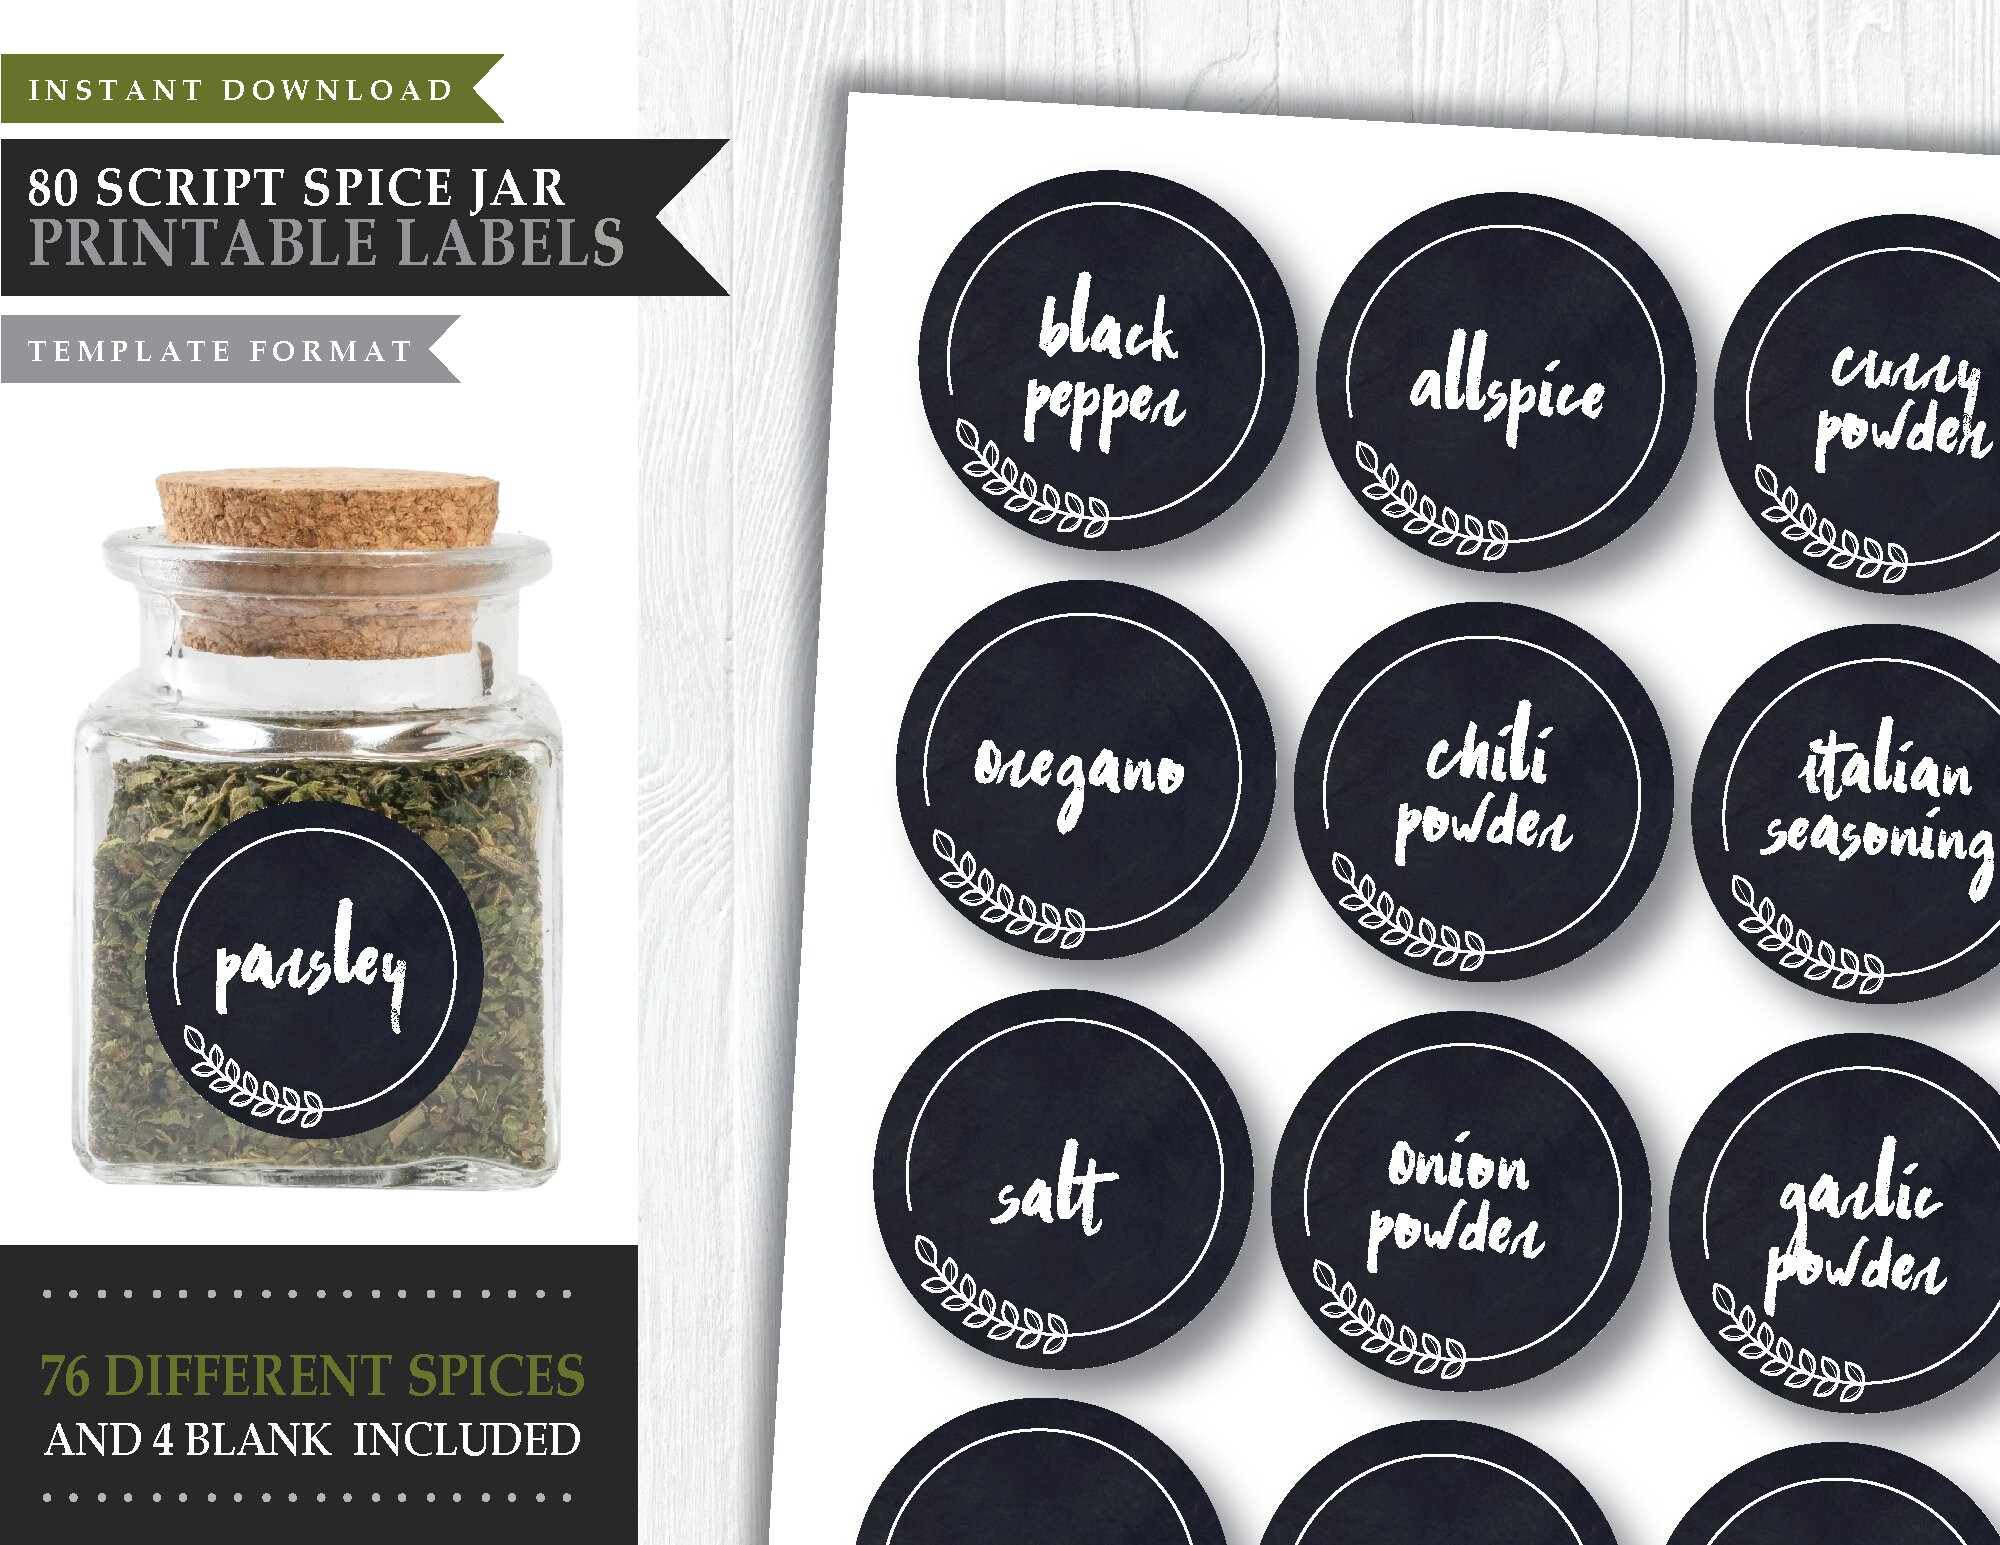 Spice Jar Label Template 3 Sizes Minimalist Pantry Printable EDITABLE  TEMPLATE 004 089 (Download Now) 